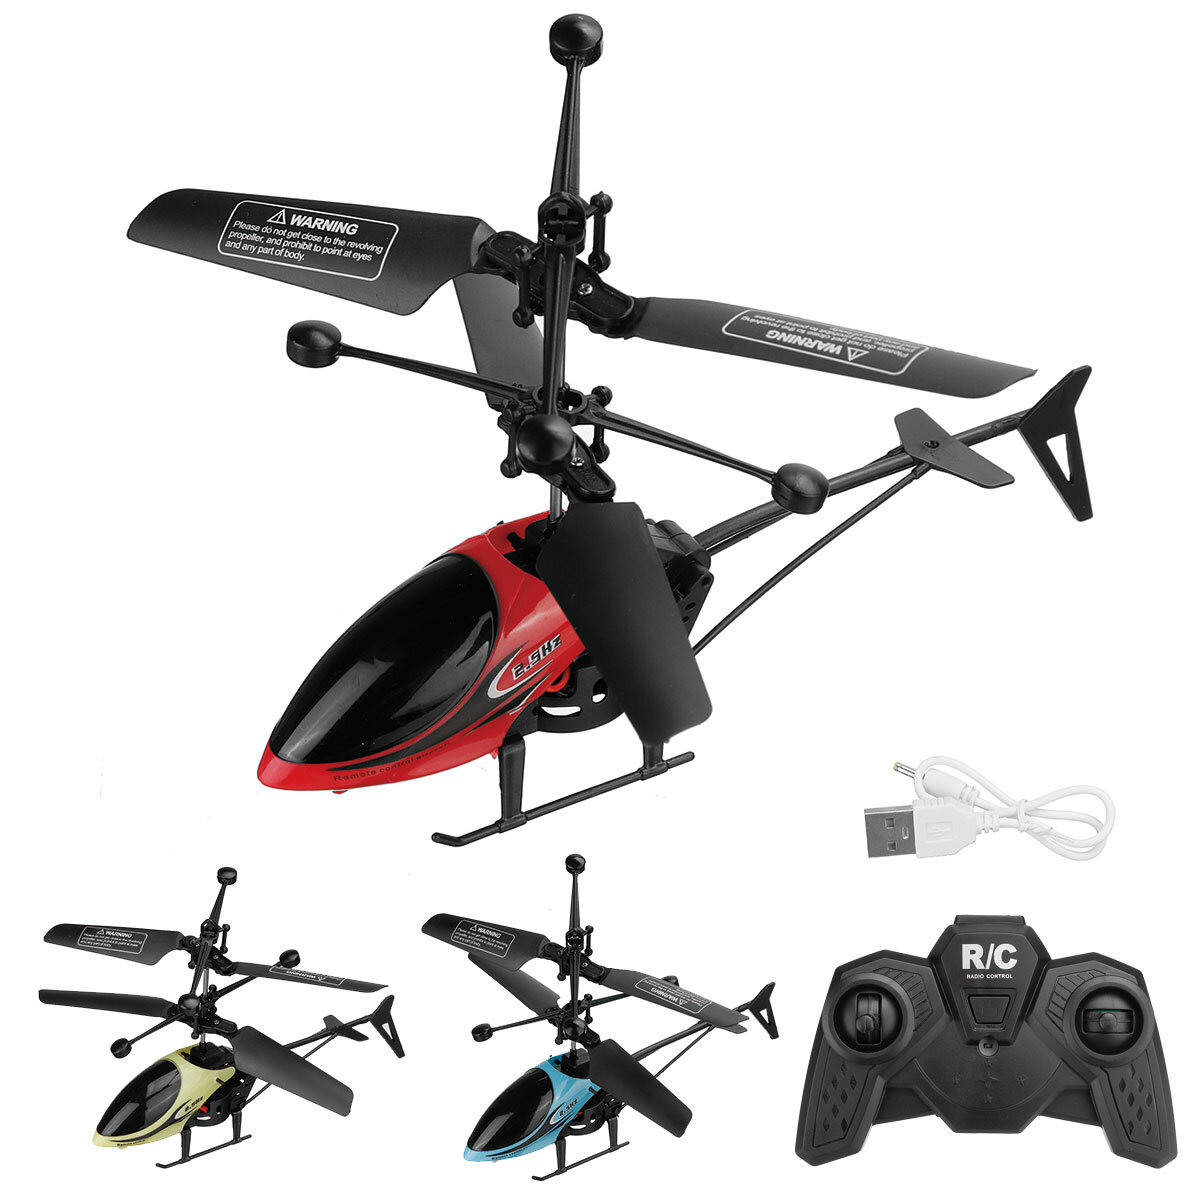 best price,2ch,mini,usb,charging,rc,helicopter,rtf,eu,discount